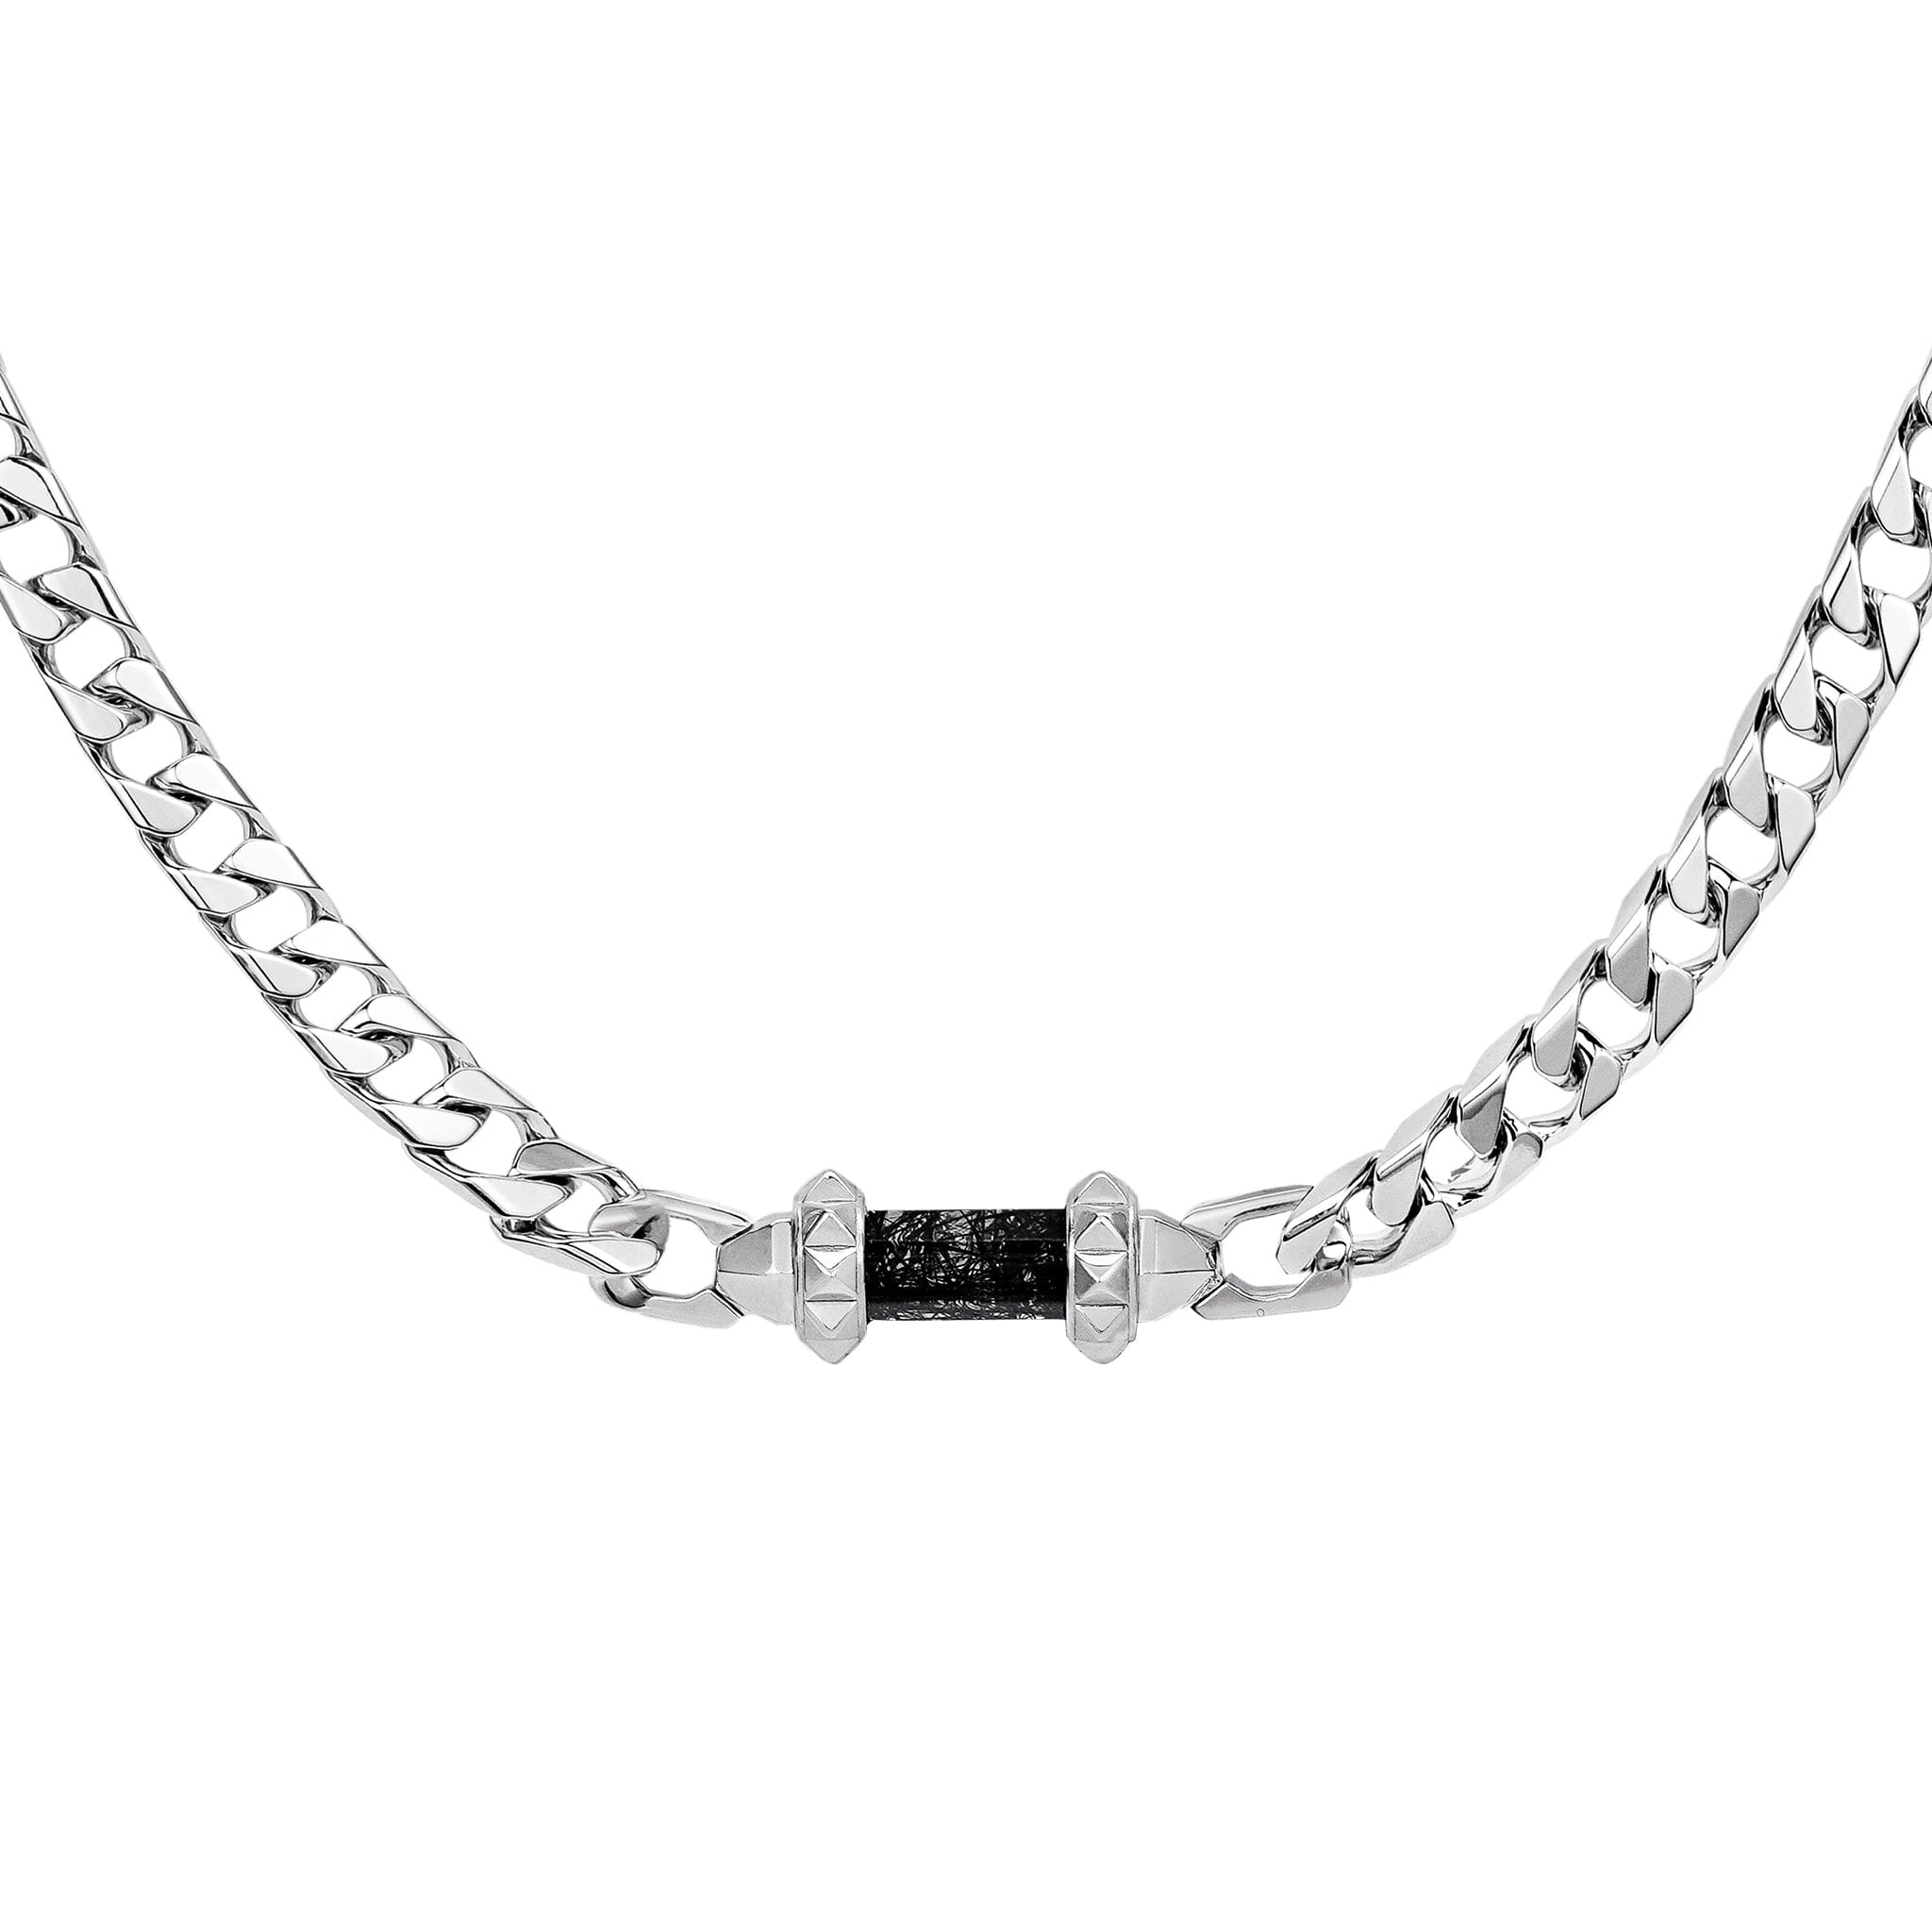 Men's Fantasy Silver Chain Necklace with Black Rutilated Quartz Necklaces WAA FASHION GROUP 55cm 